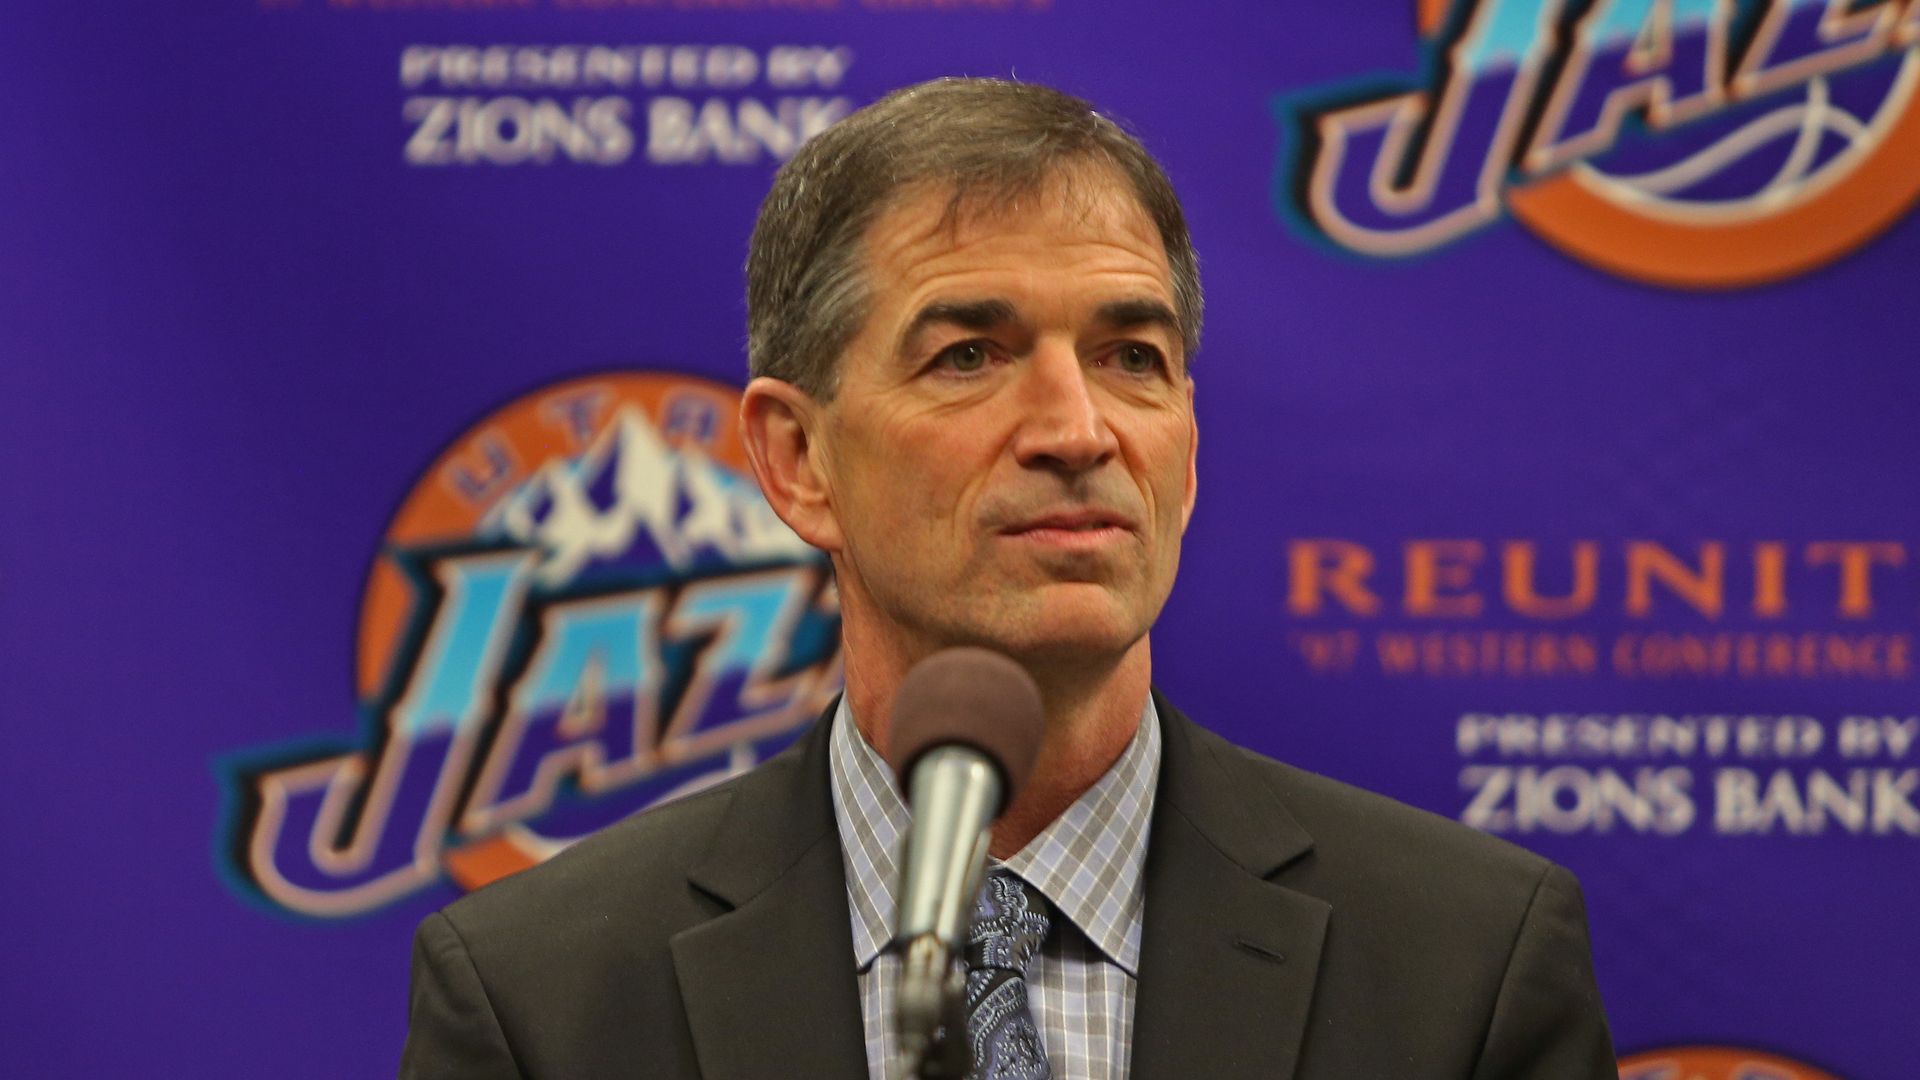 Former Utah Jazz player John Stockton during a press conference on March 22, 2017 a in Salt Lake City, Utah. 